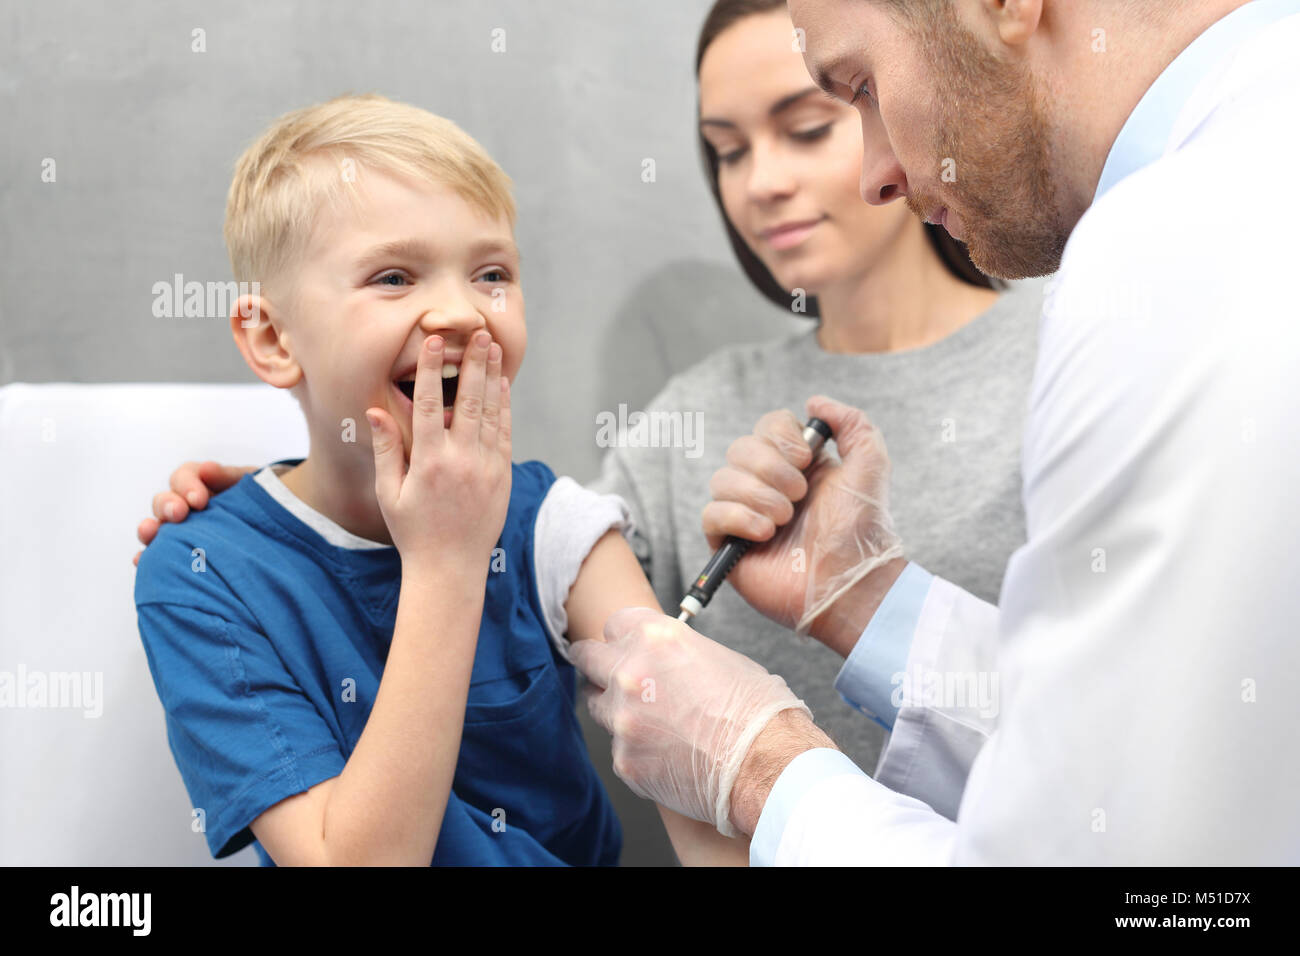 Diabetes clinic for children. A child with diabetes when injecting insulin Stock Photo